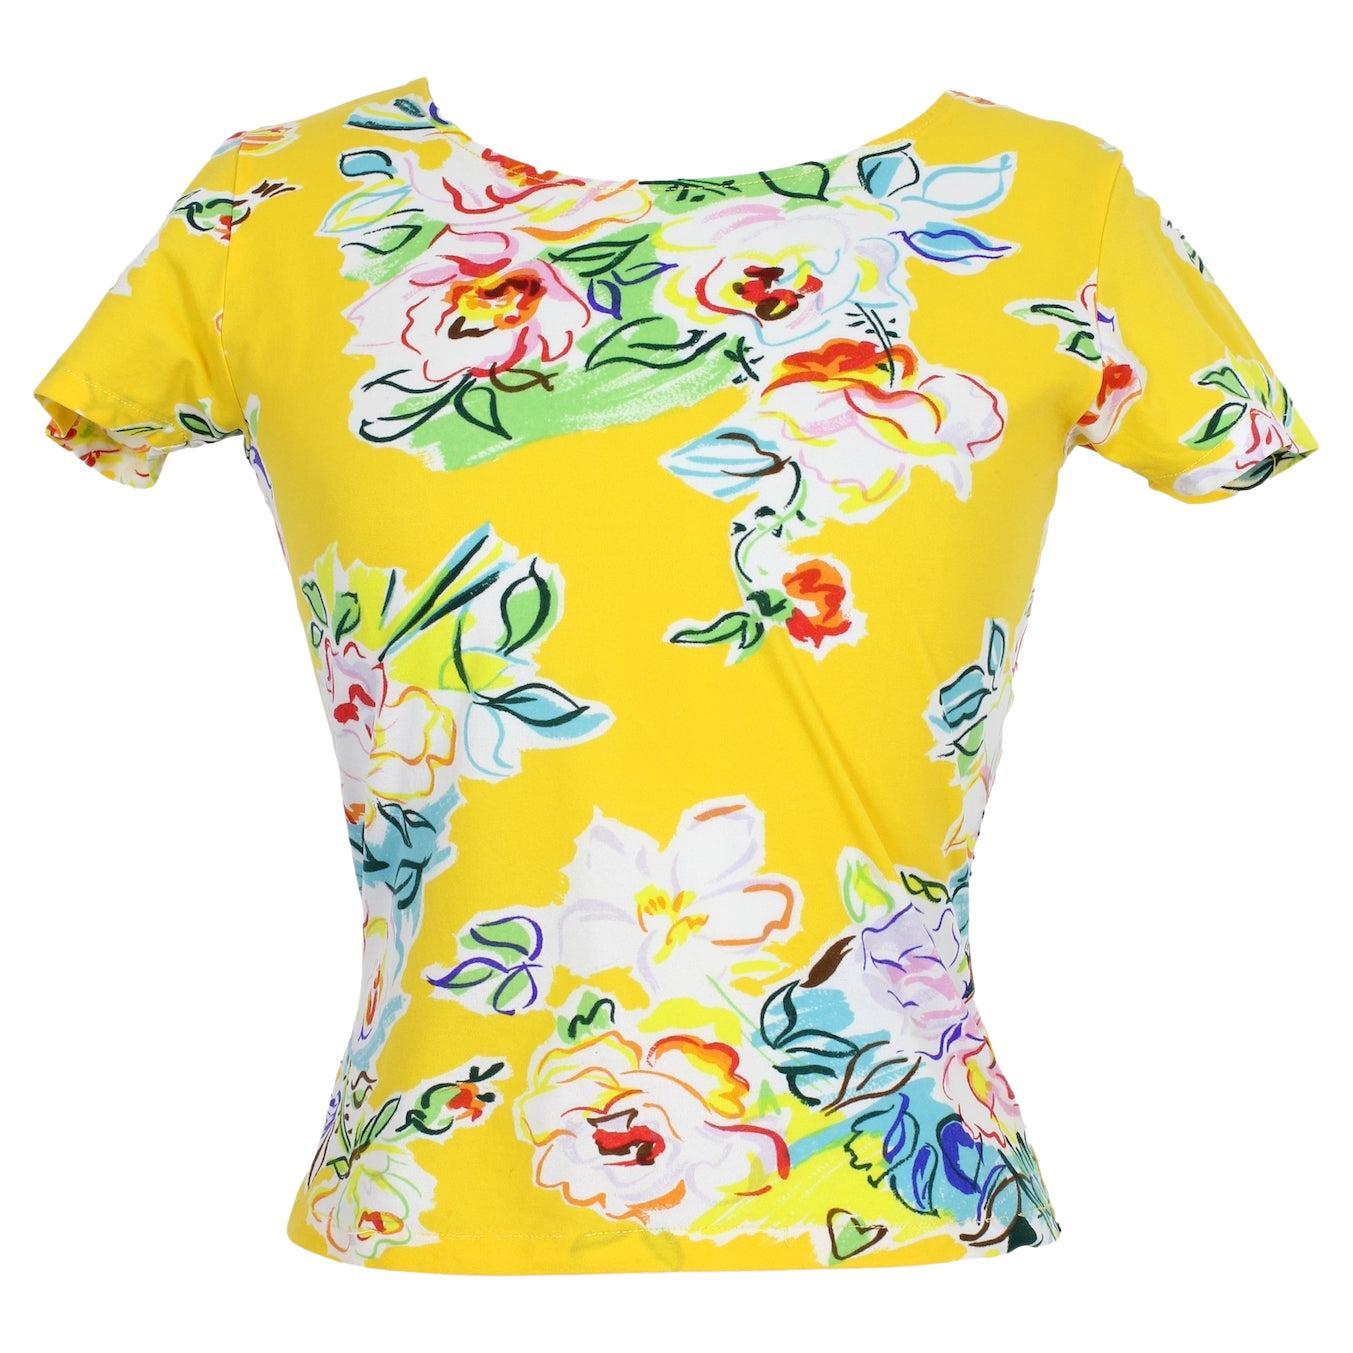 Kenzo Yellow Floral Casual T Shirt 2000s For Sale